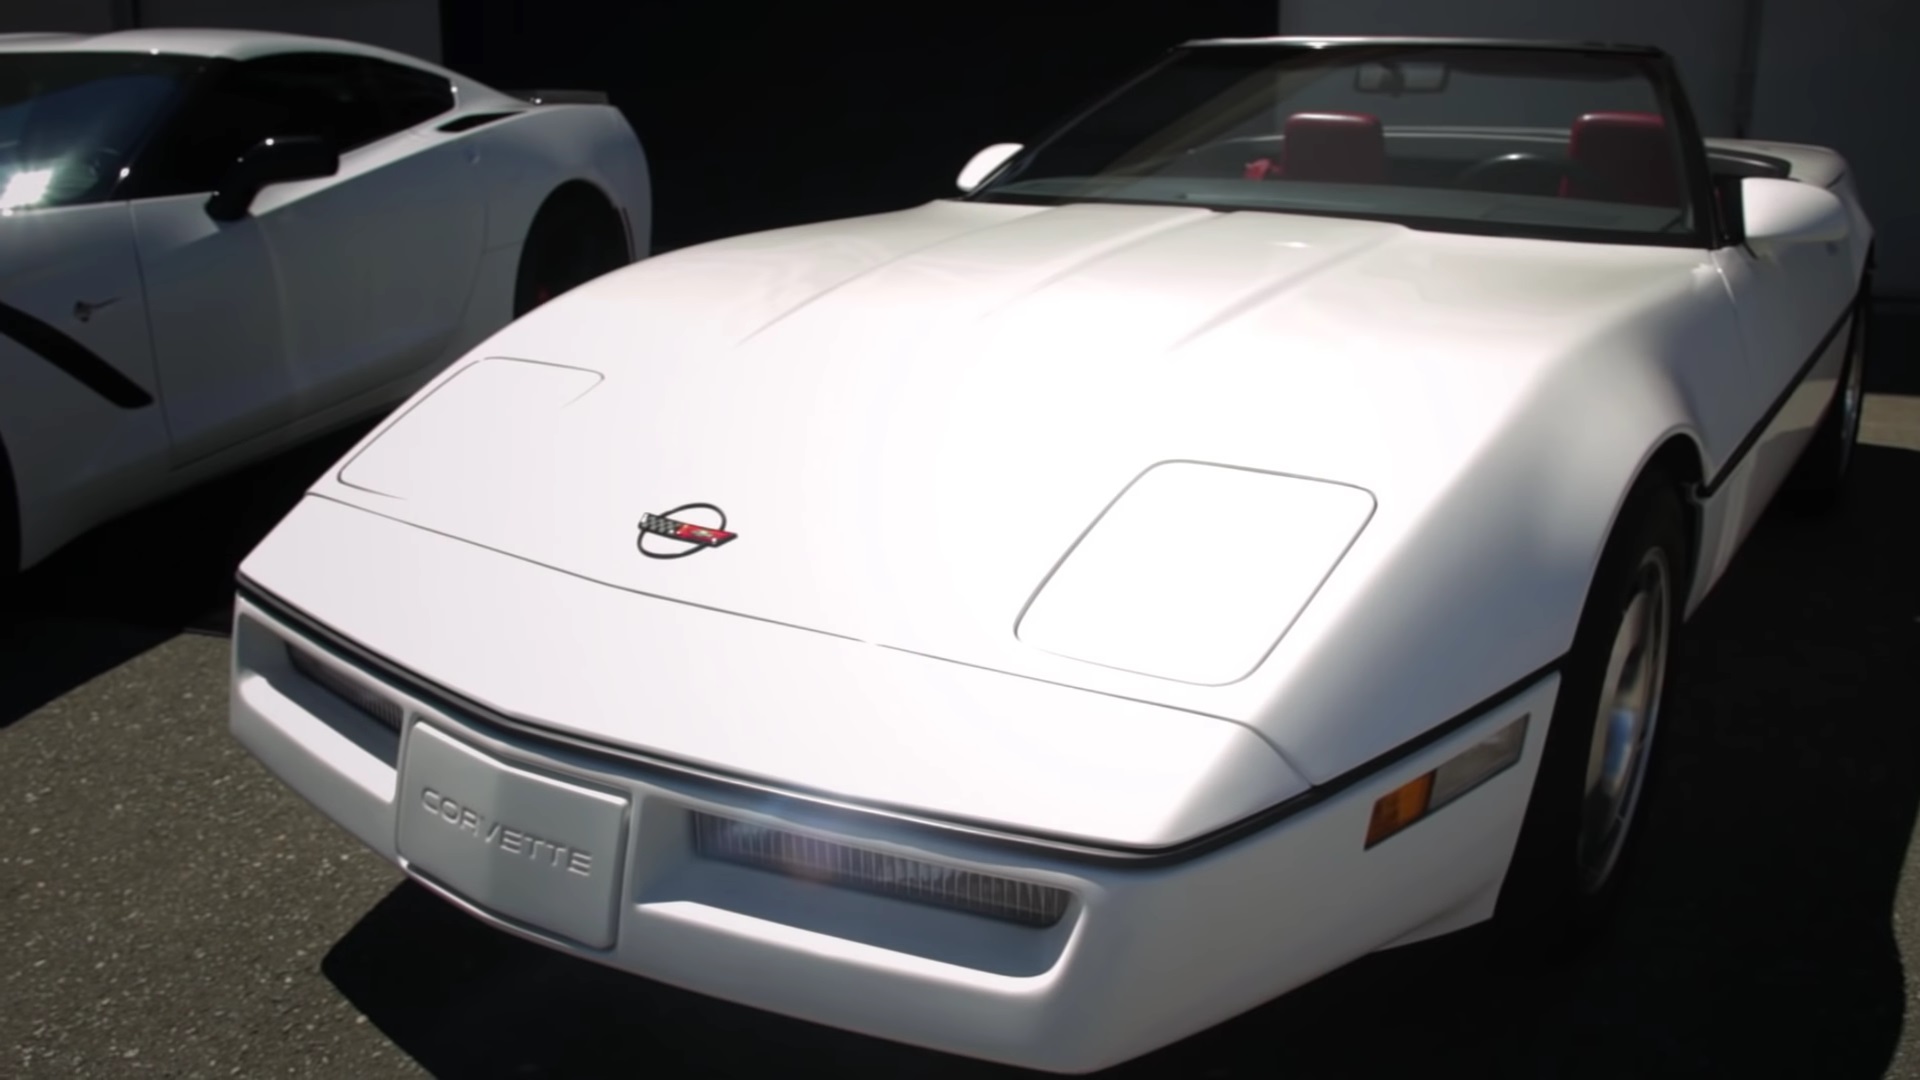 Looking Back At The 1987 Chevrolet Corvette Convertible & Taking It For A Spin